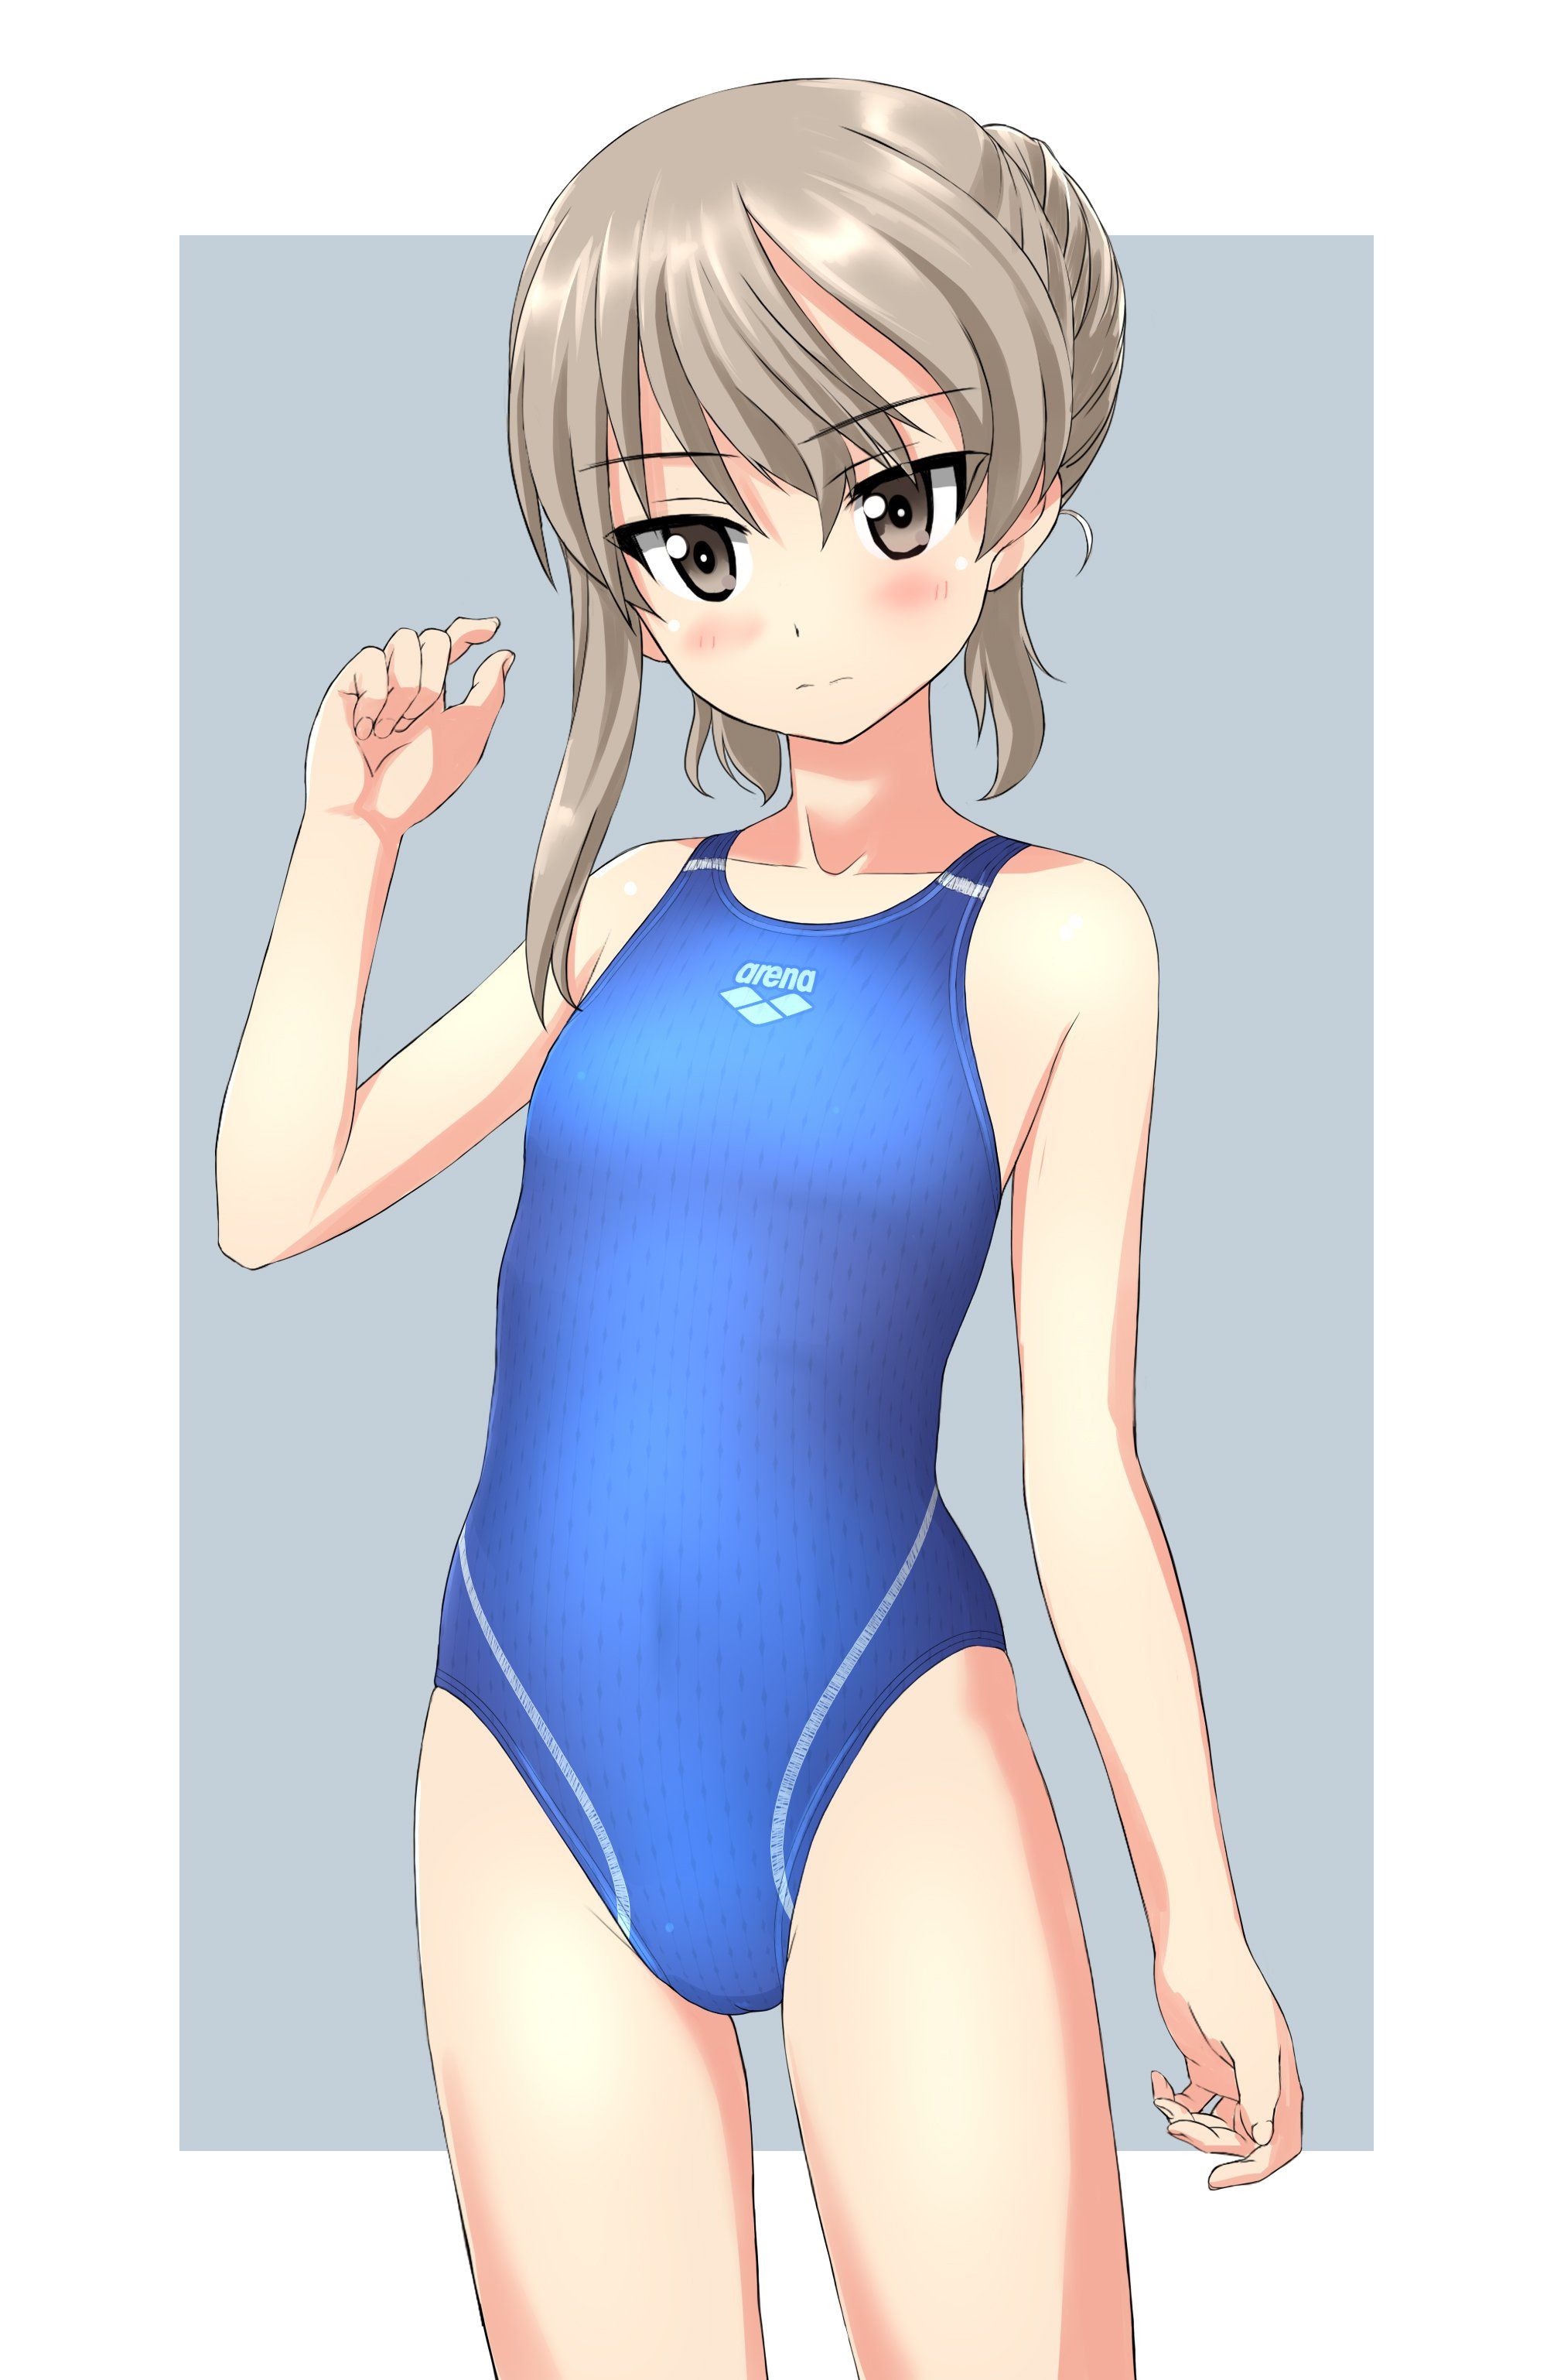 Isn't the fit of the swimming suit too good? I'm greedy because I can see a lot of things like or 6